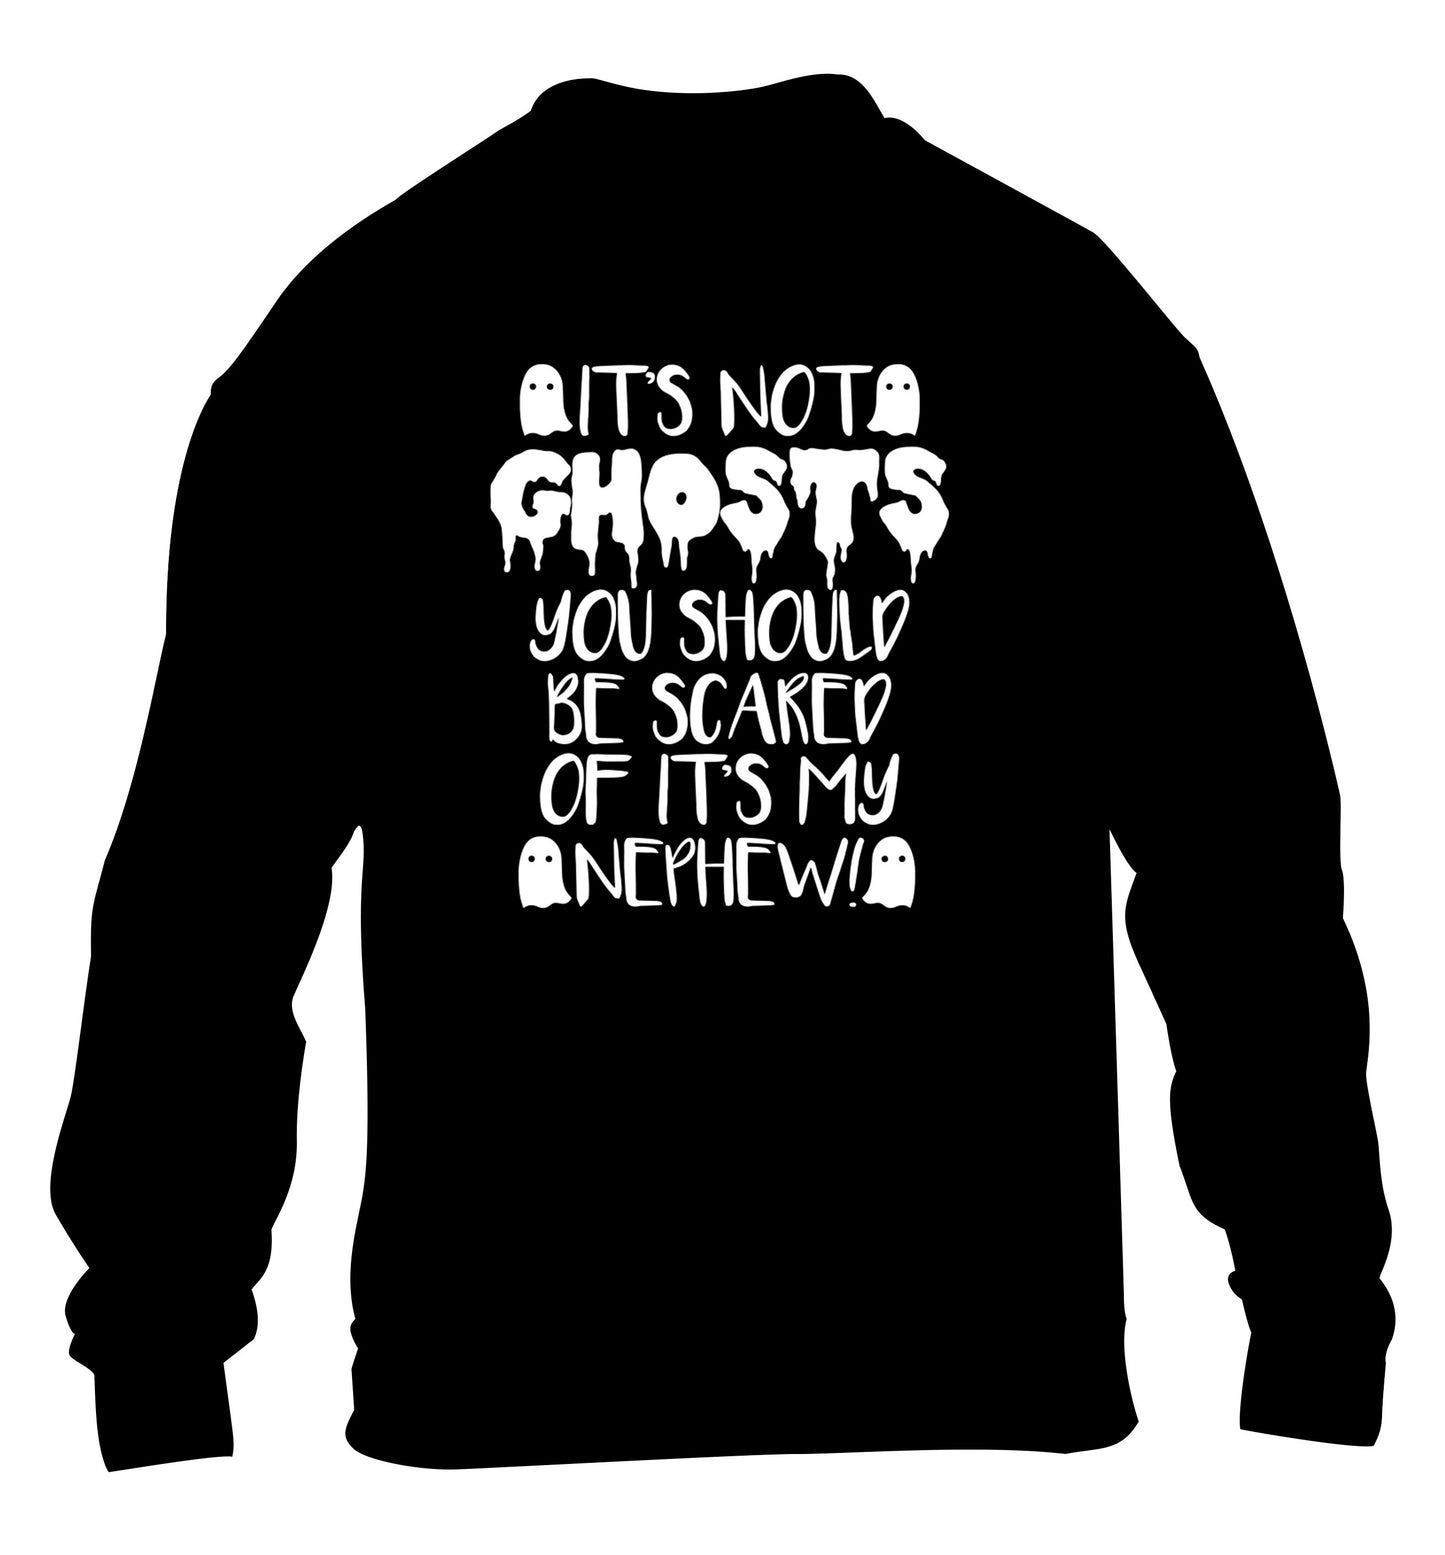 It's not ghosts you should be scared of it's my nephew! children's black sweater 12-14 Years